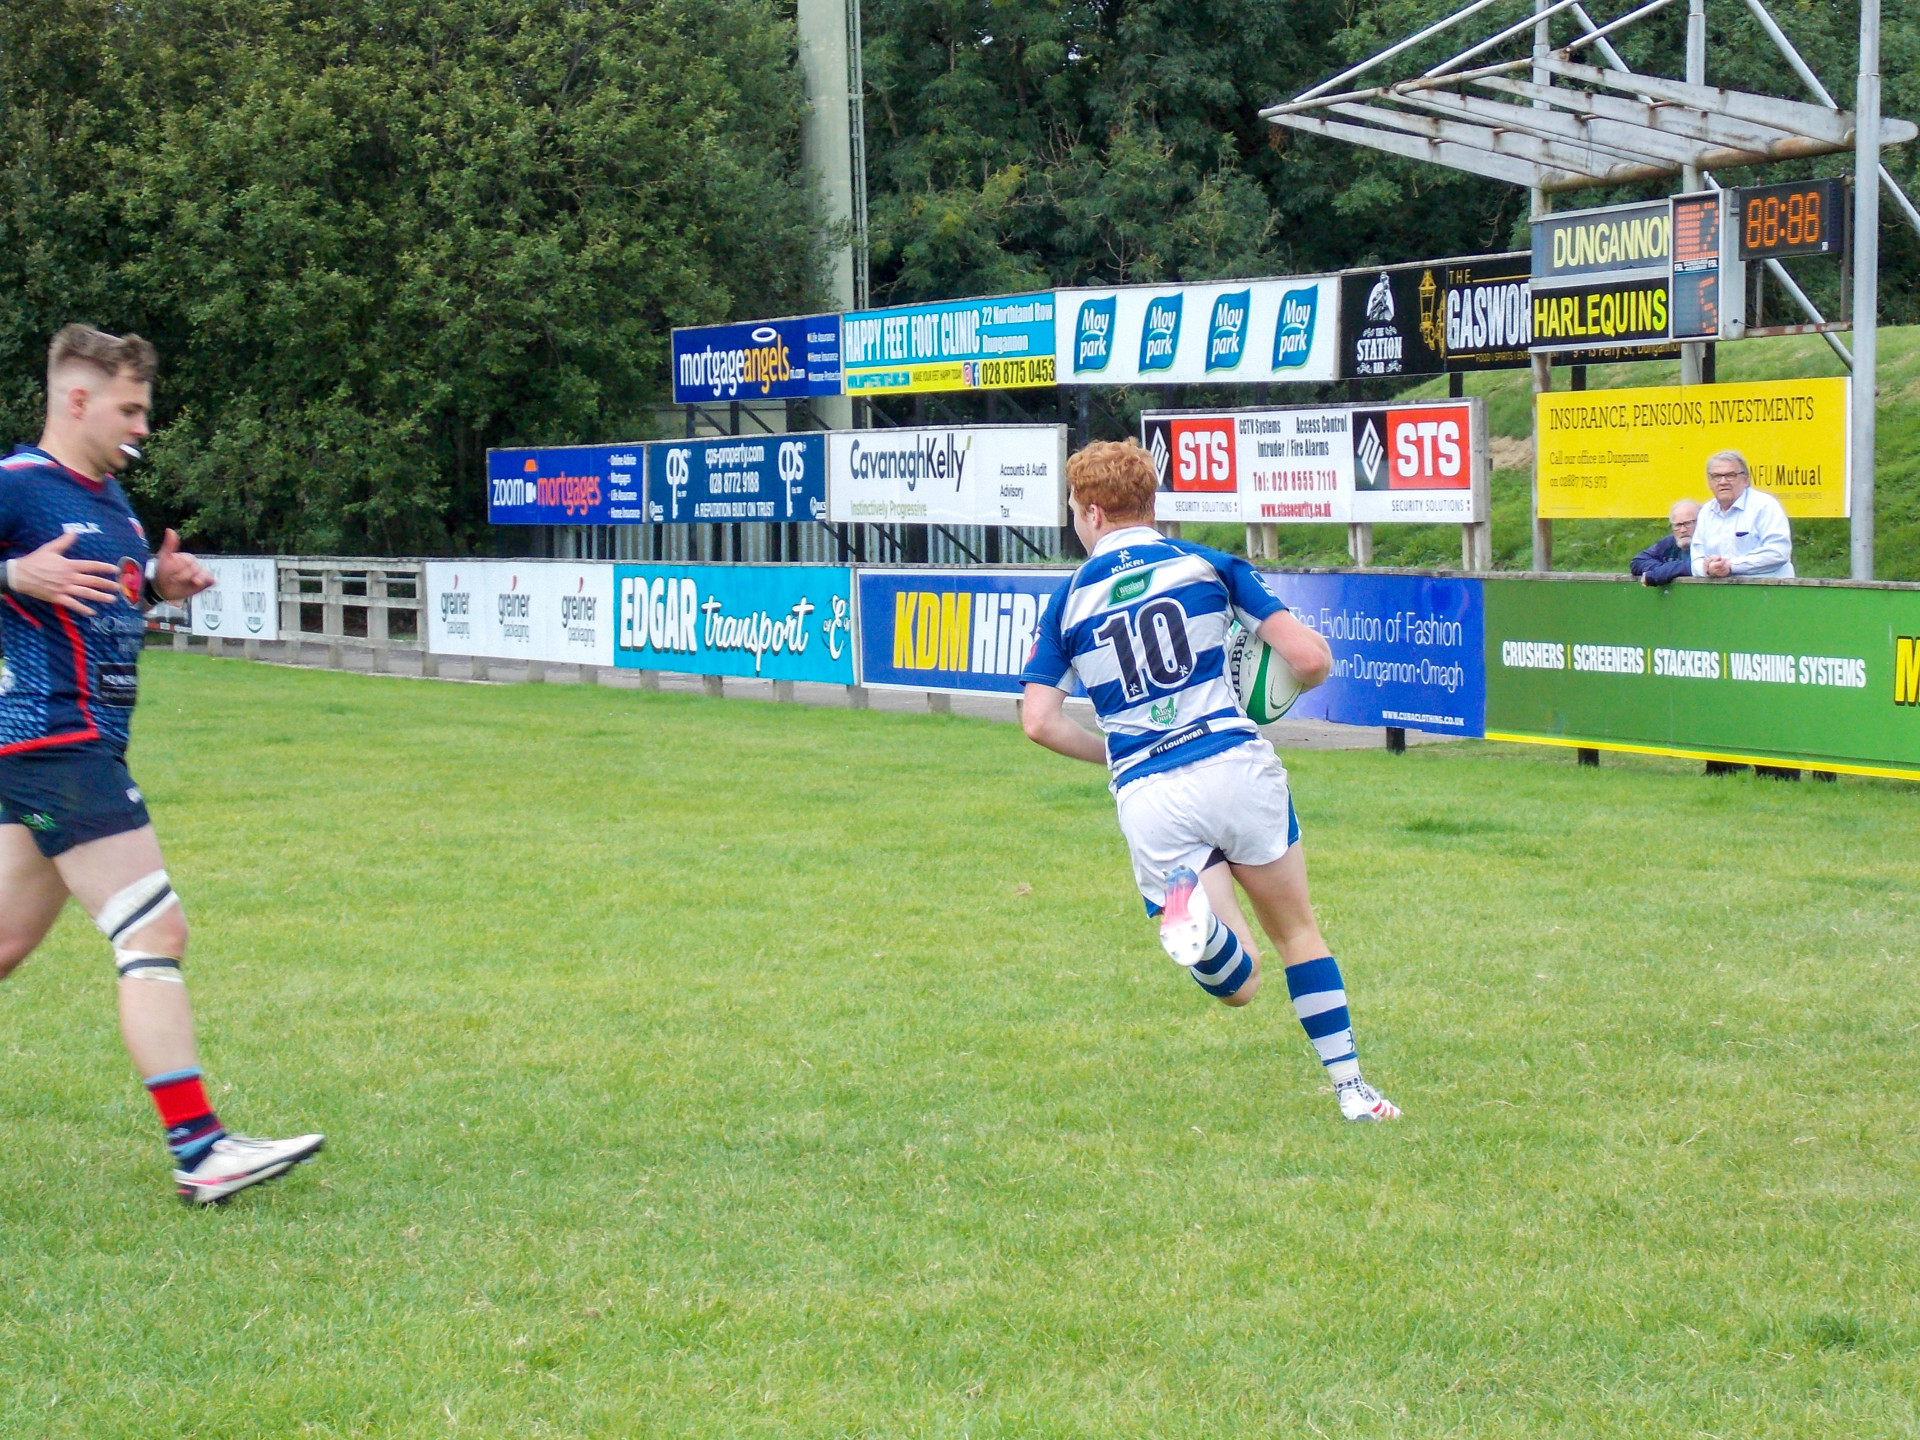 Dungannon open campaign with win over Harlequins